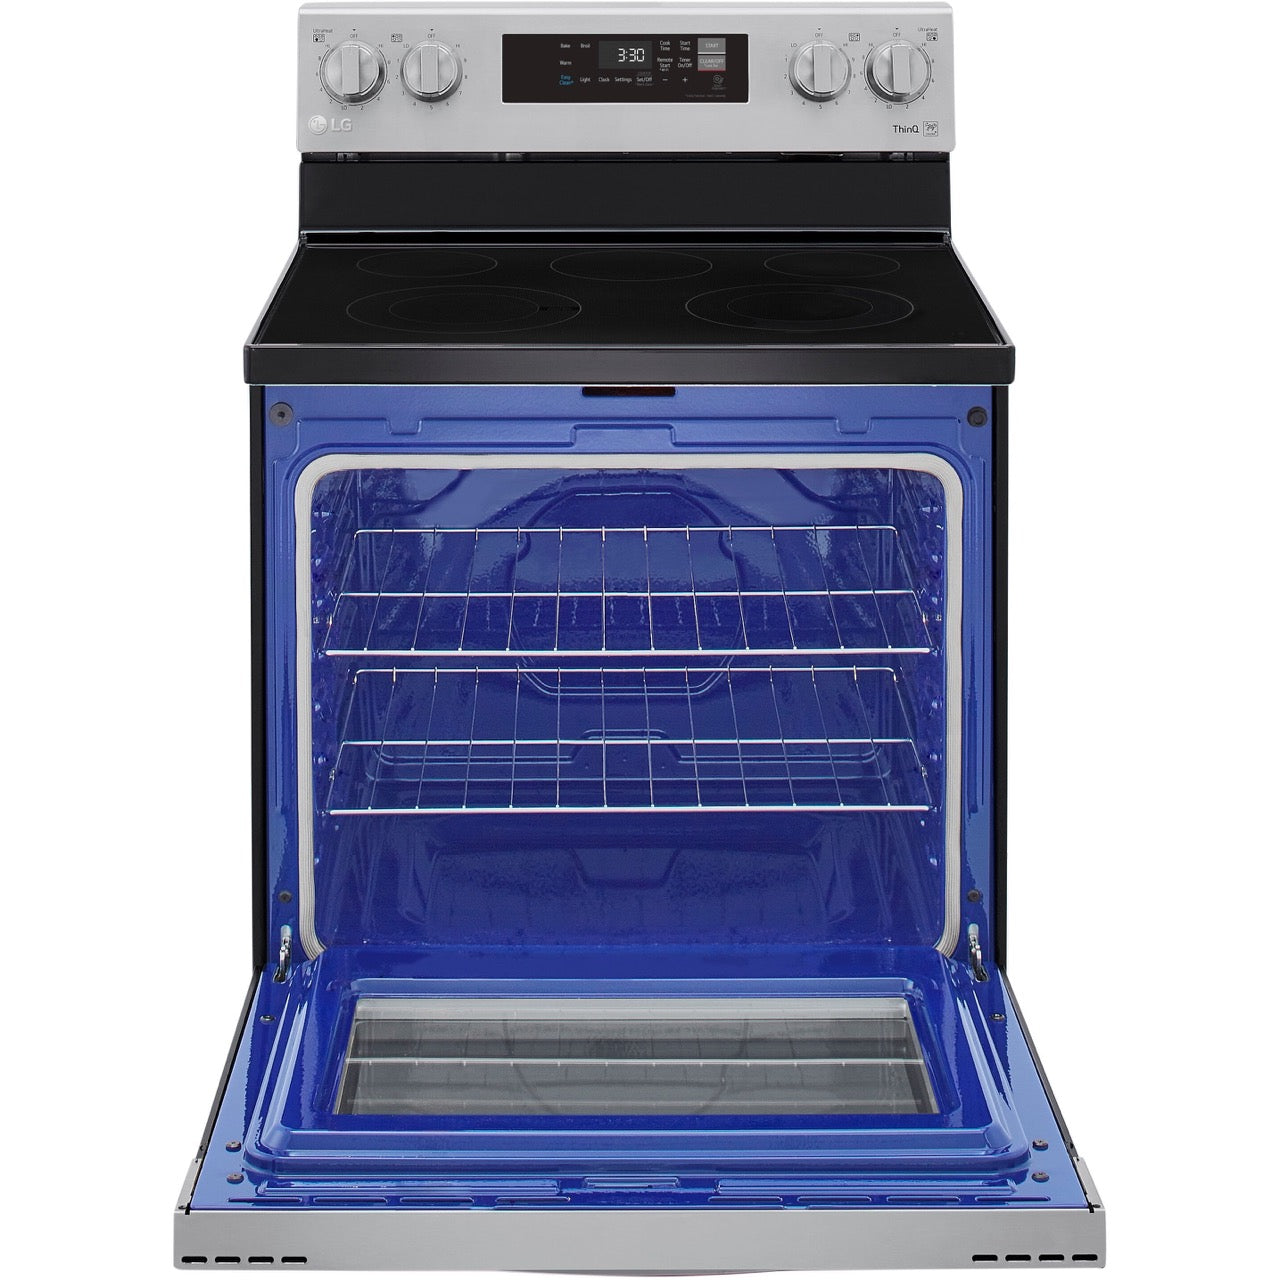 LG 6.3-Cu. Ft. Electric Smart Range with EasyClean, Stainless Steel (LREL6321S)